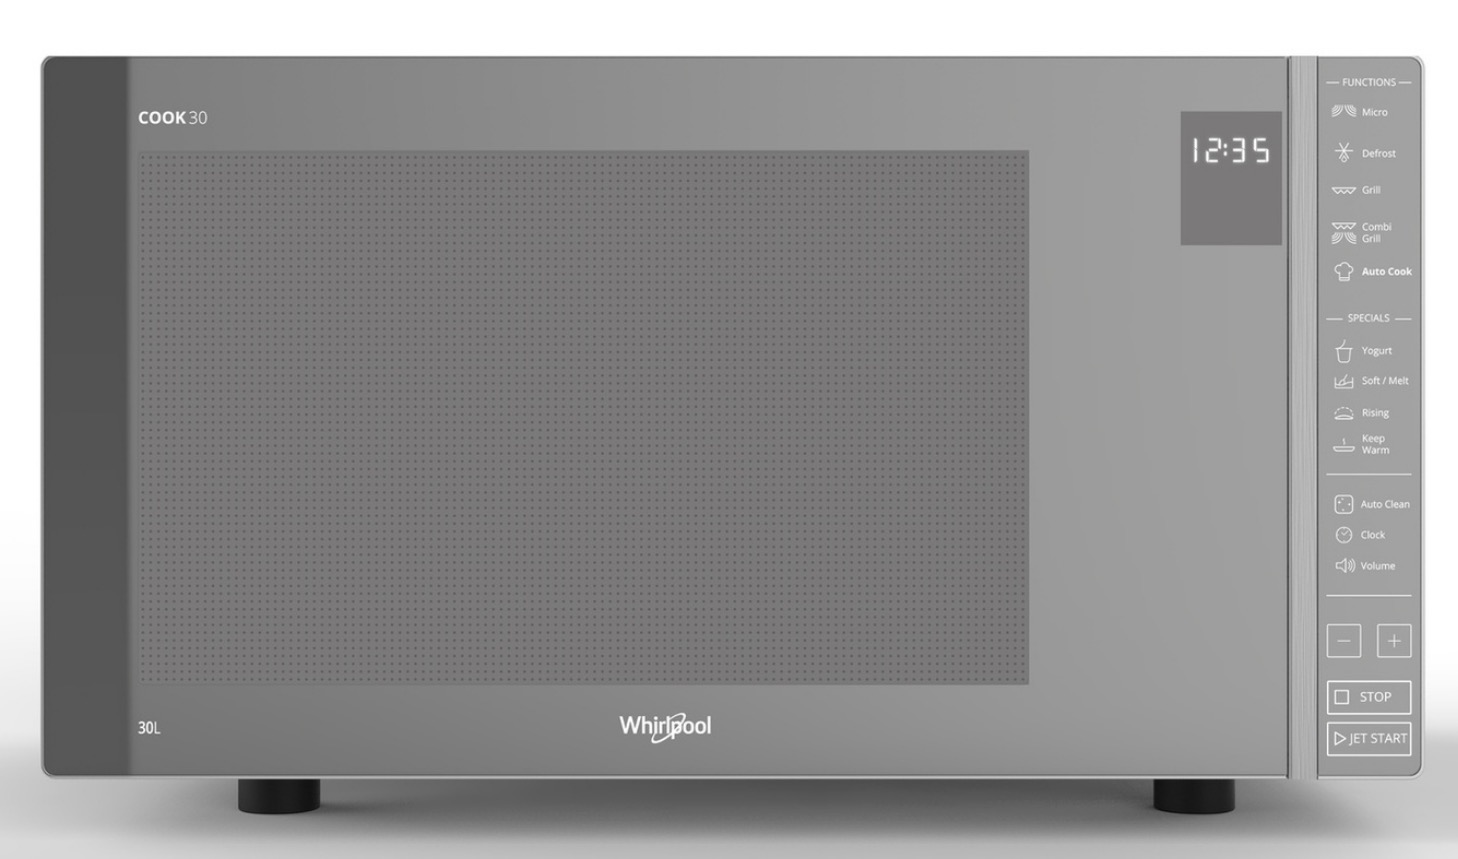 Micro ondes et gril Whirlpool MWP303M à 169€